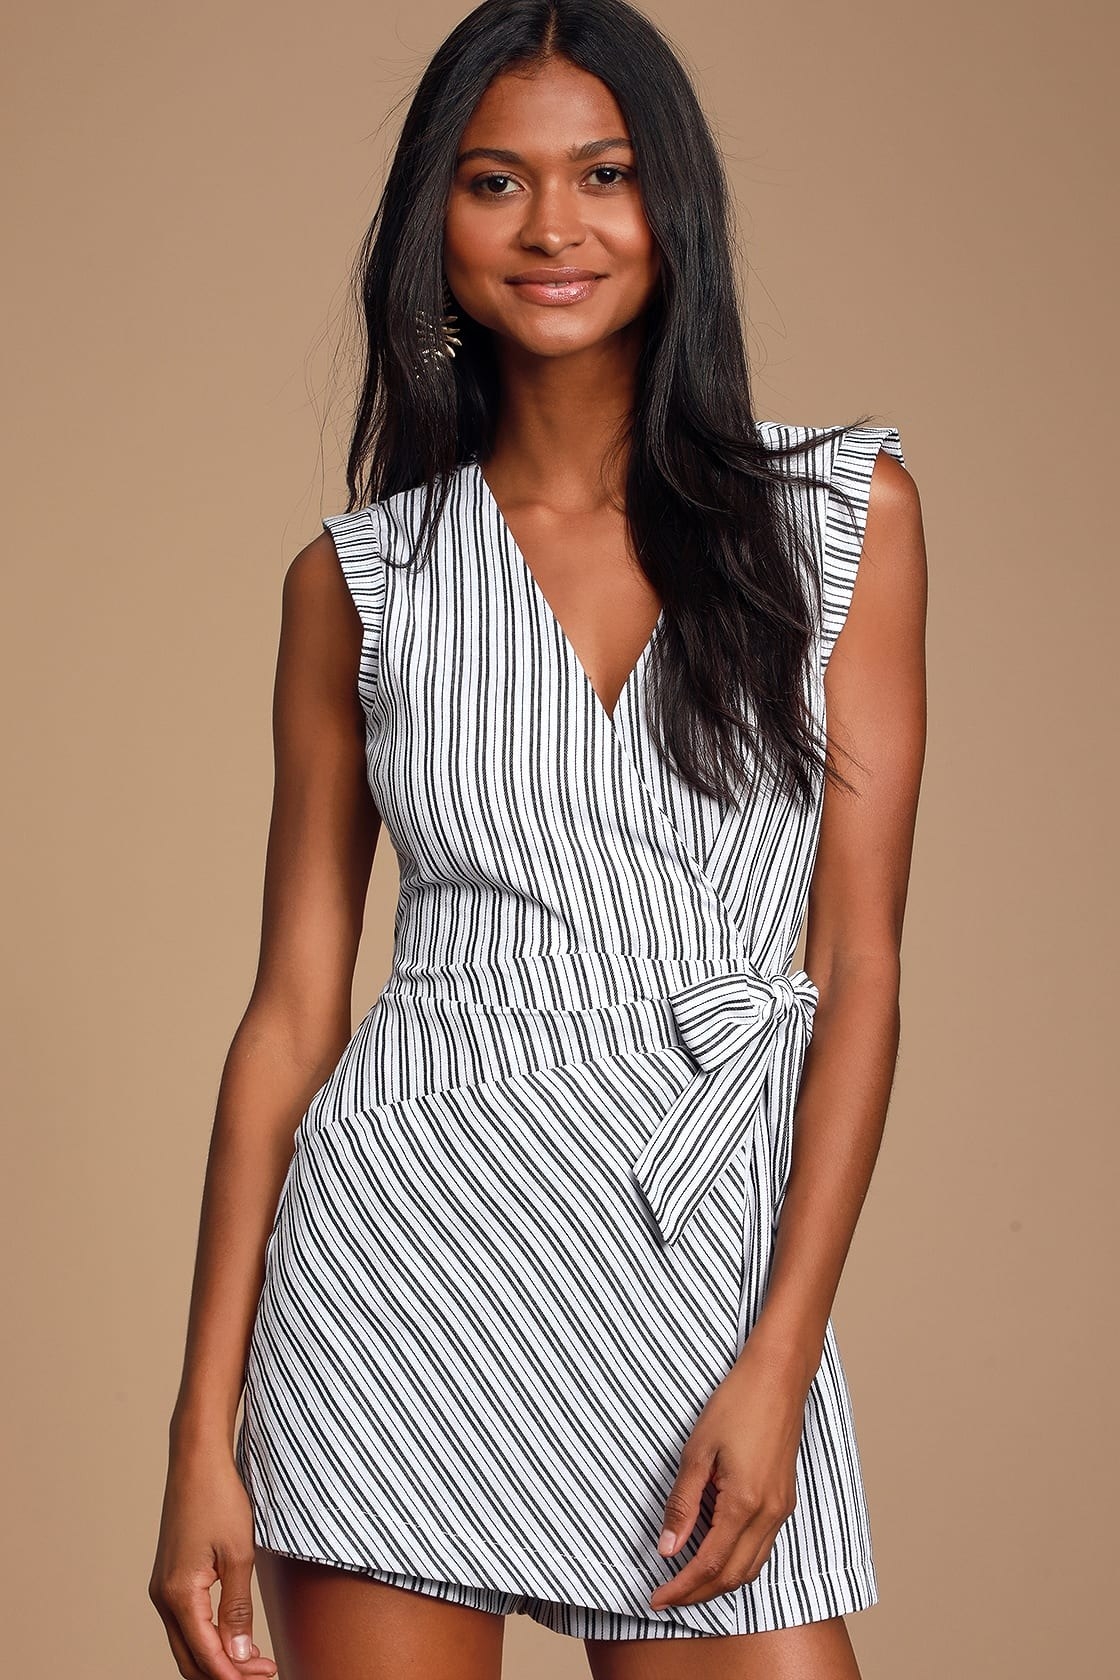 Model wearing black and white striped wrapped romper with tie in front